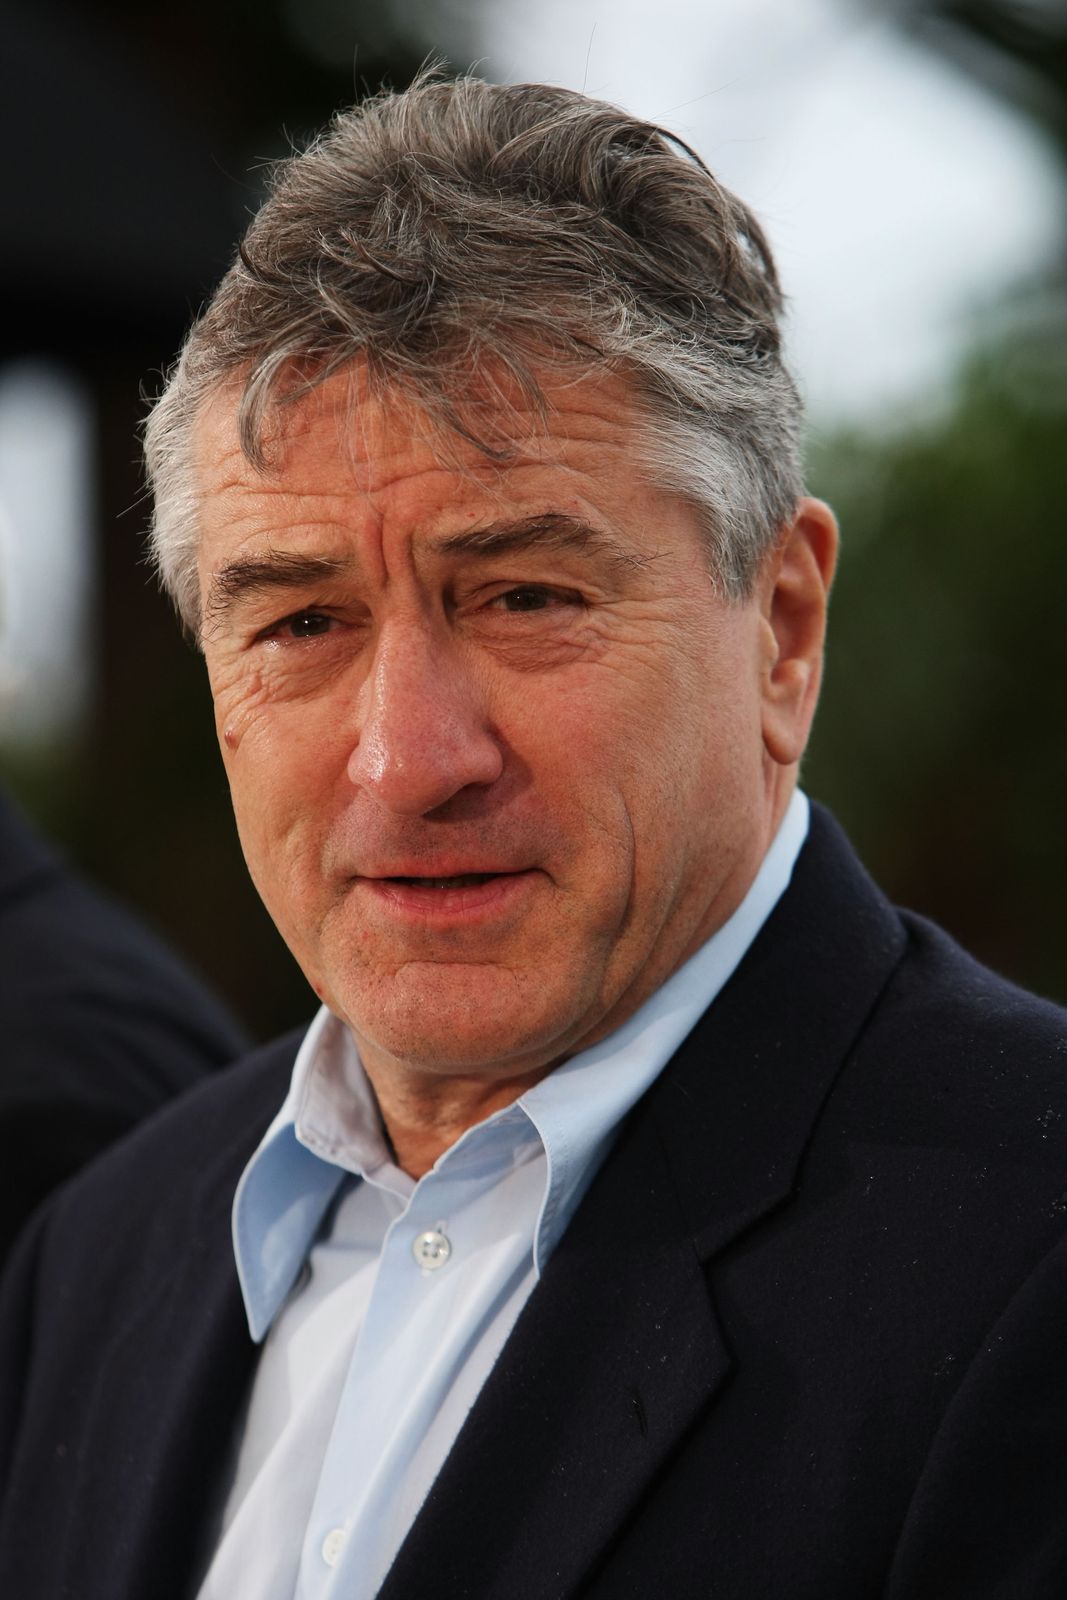 Robert De Niro speaks out about his father, a gay personality